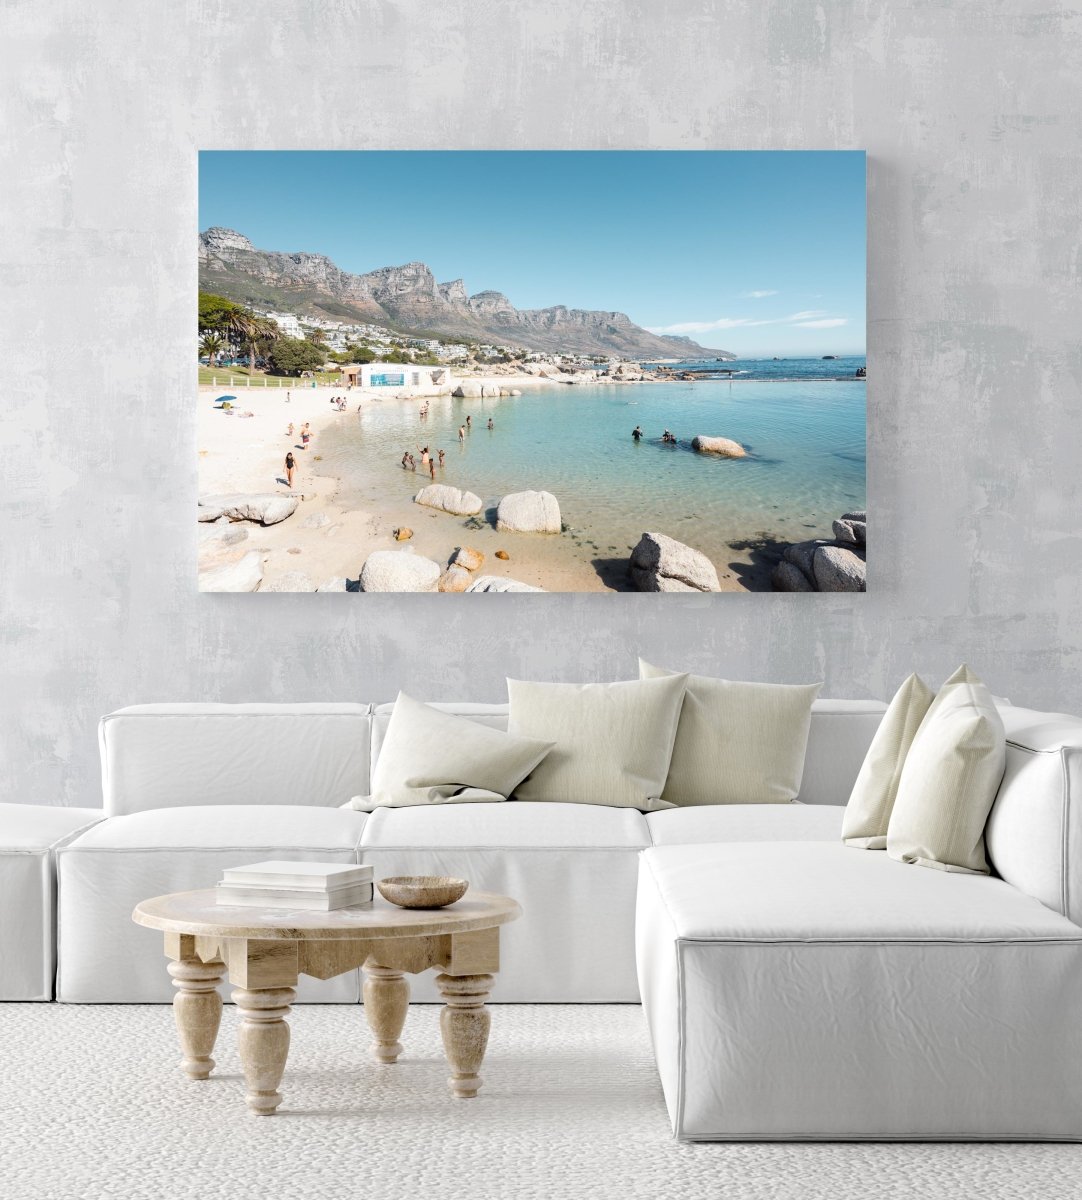 People swimming in the blue tidal pool in Camps Bay Cape Town in an acrylic/perspex frame